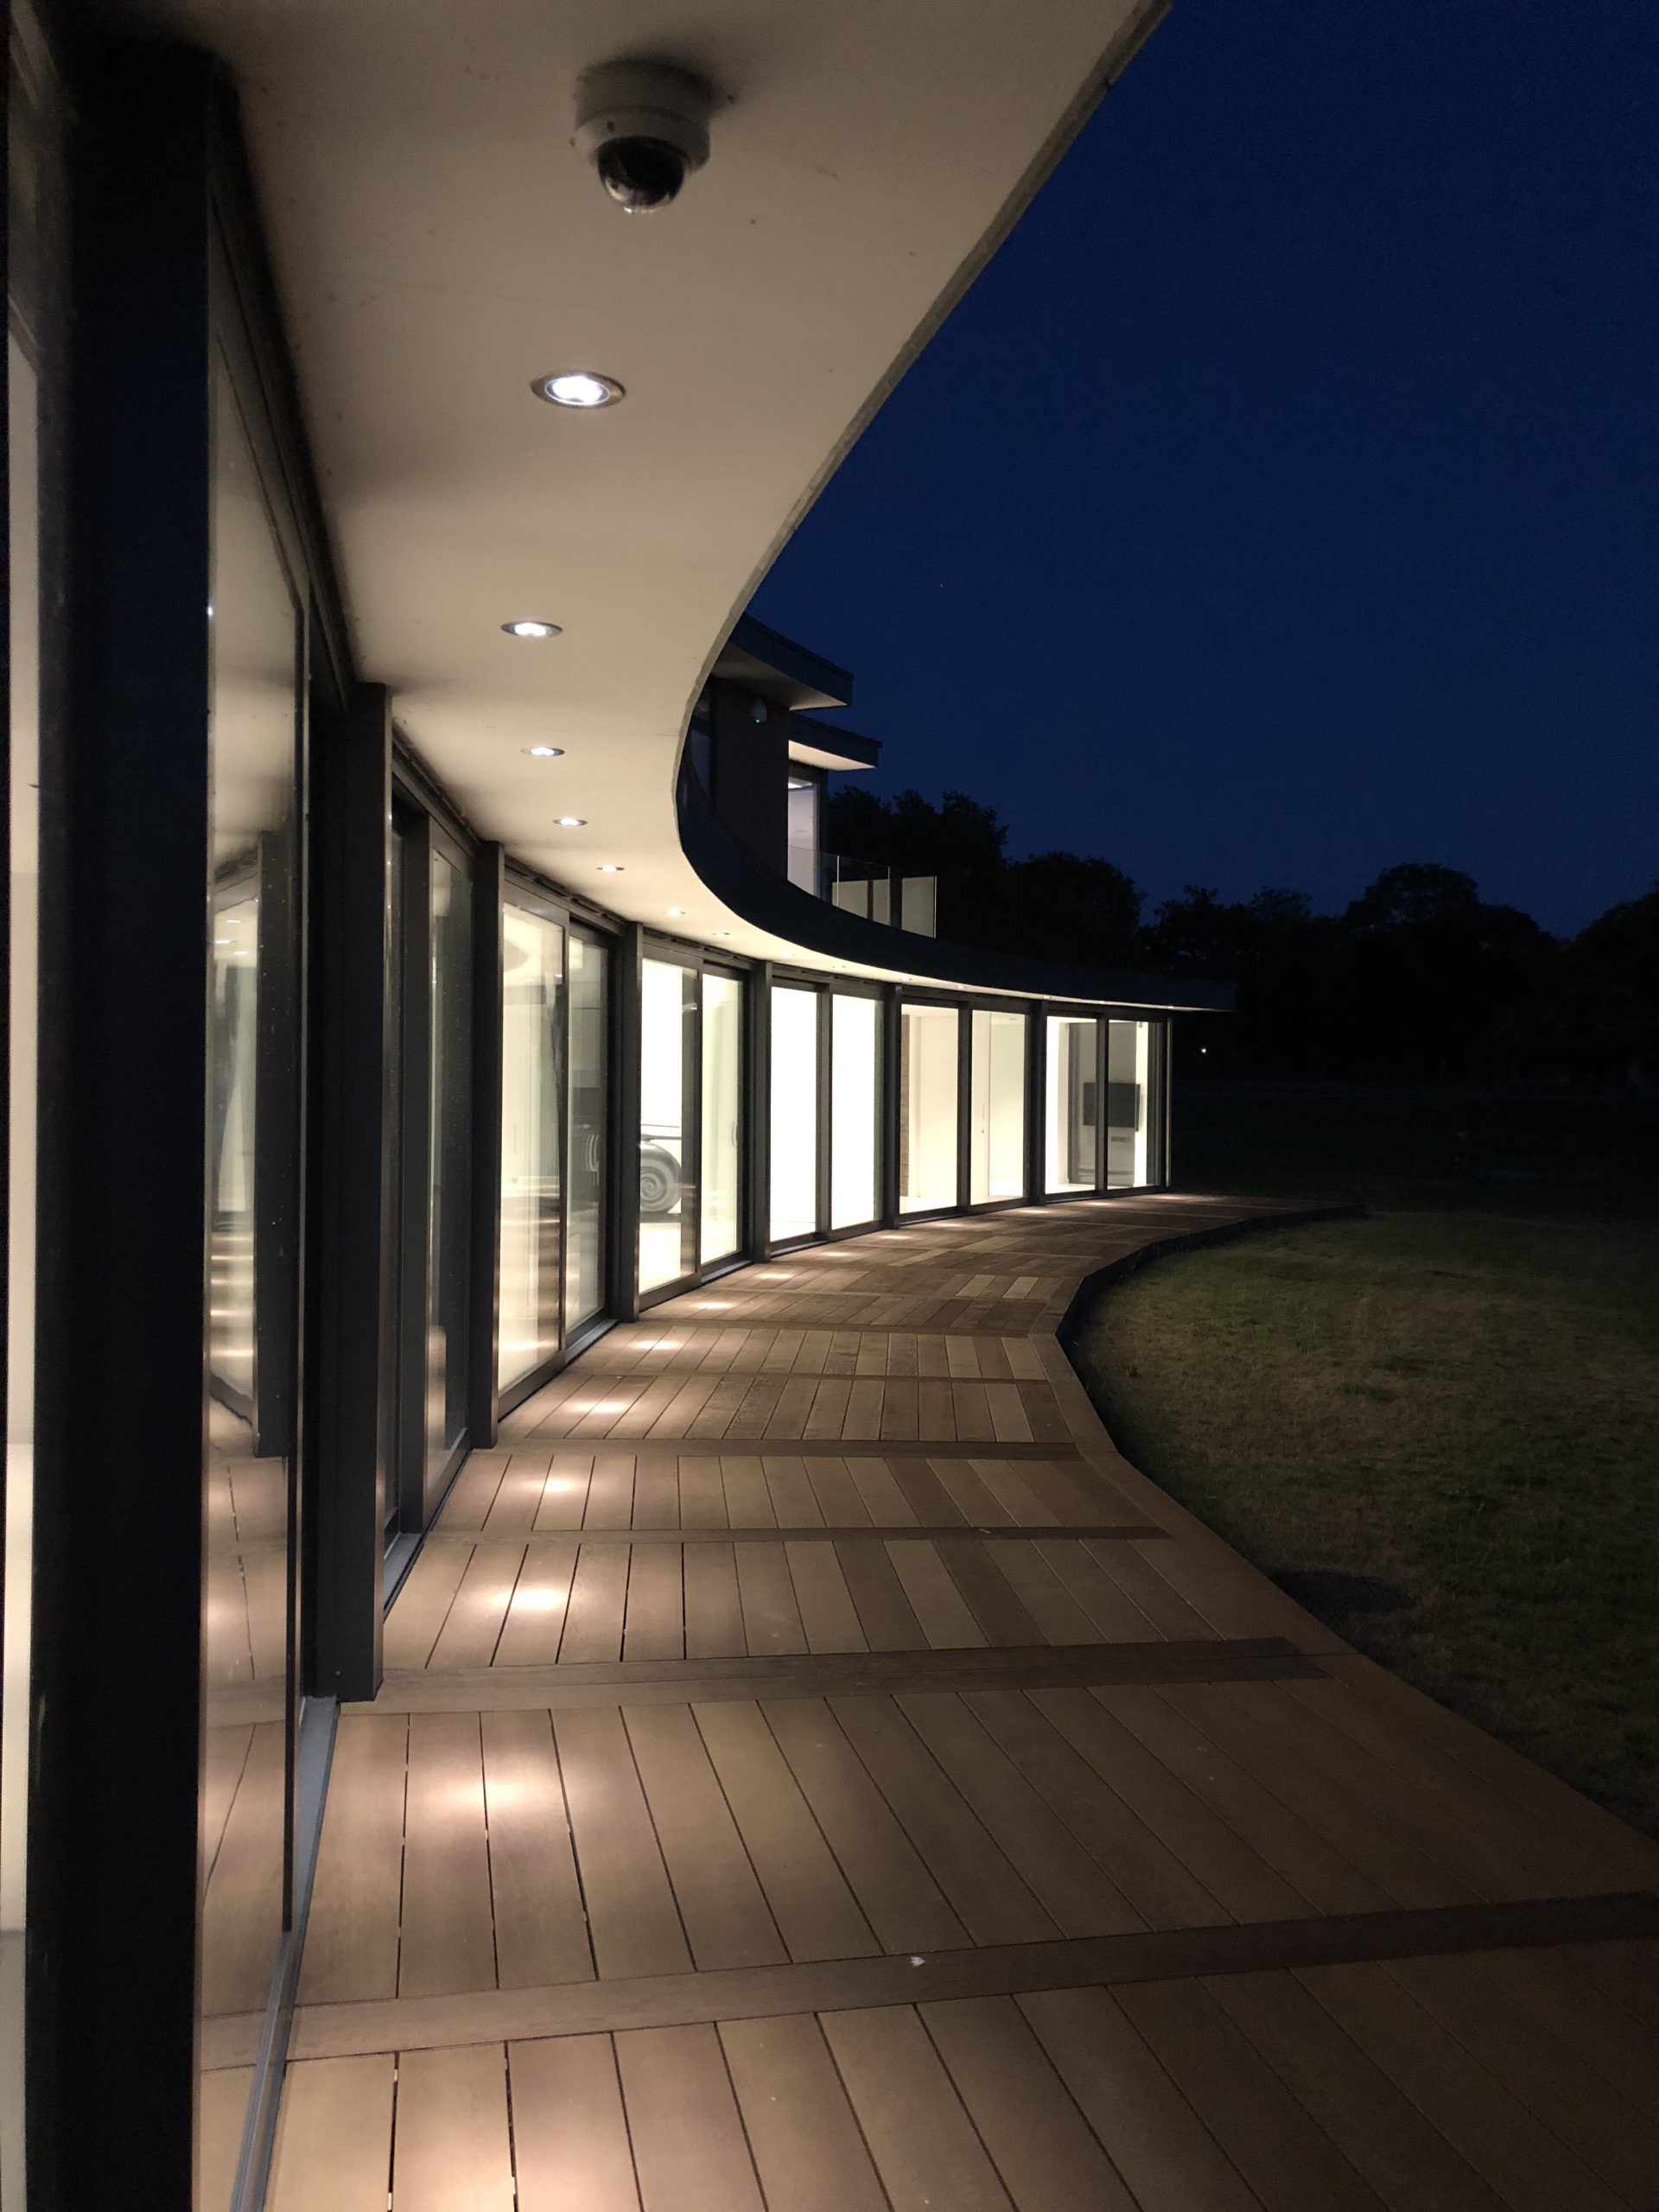 Outside lights creating pathway. Lighting contol is an important part of home automation.